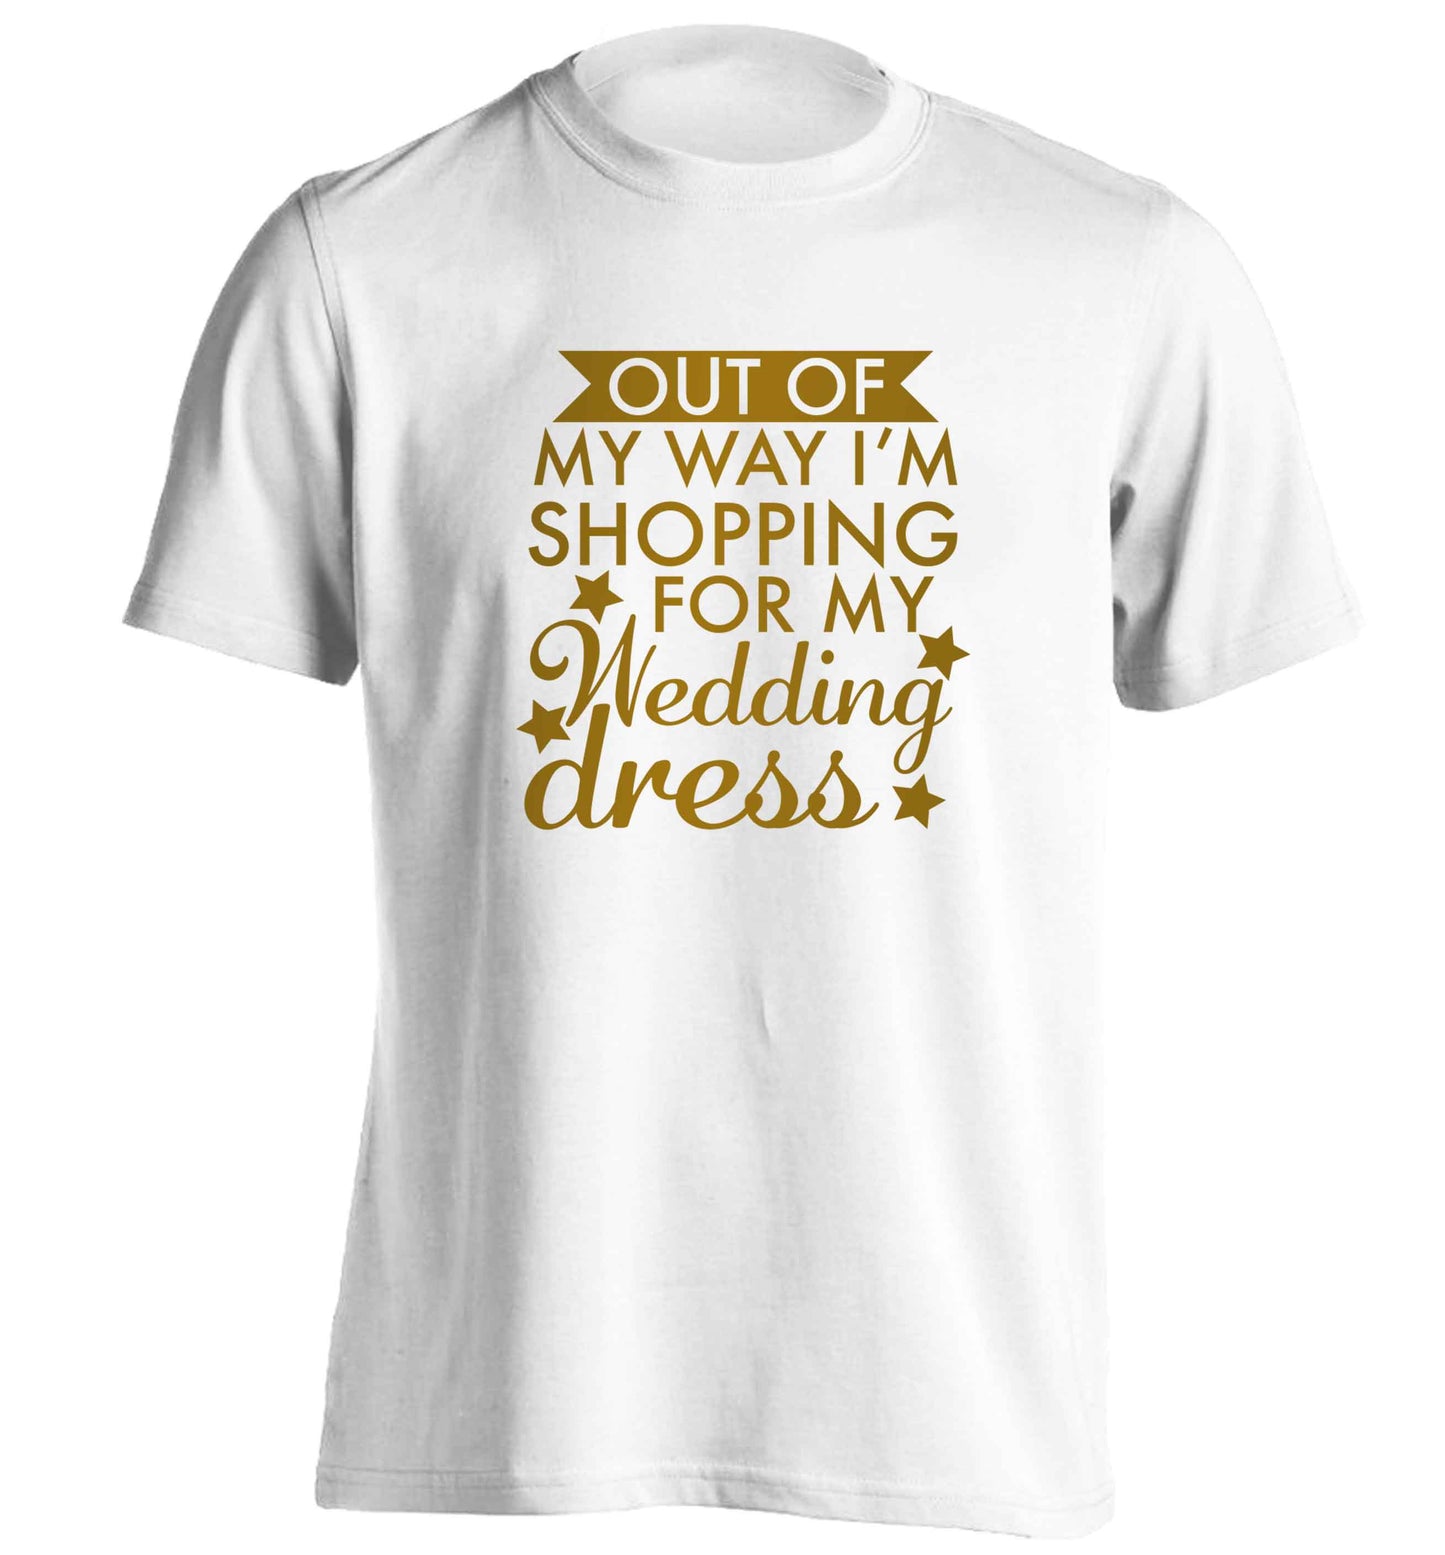 Out of my way I'm shopping for my wedding dress adults unisex white Tshirt 2XL